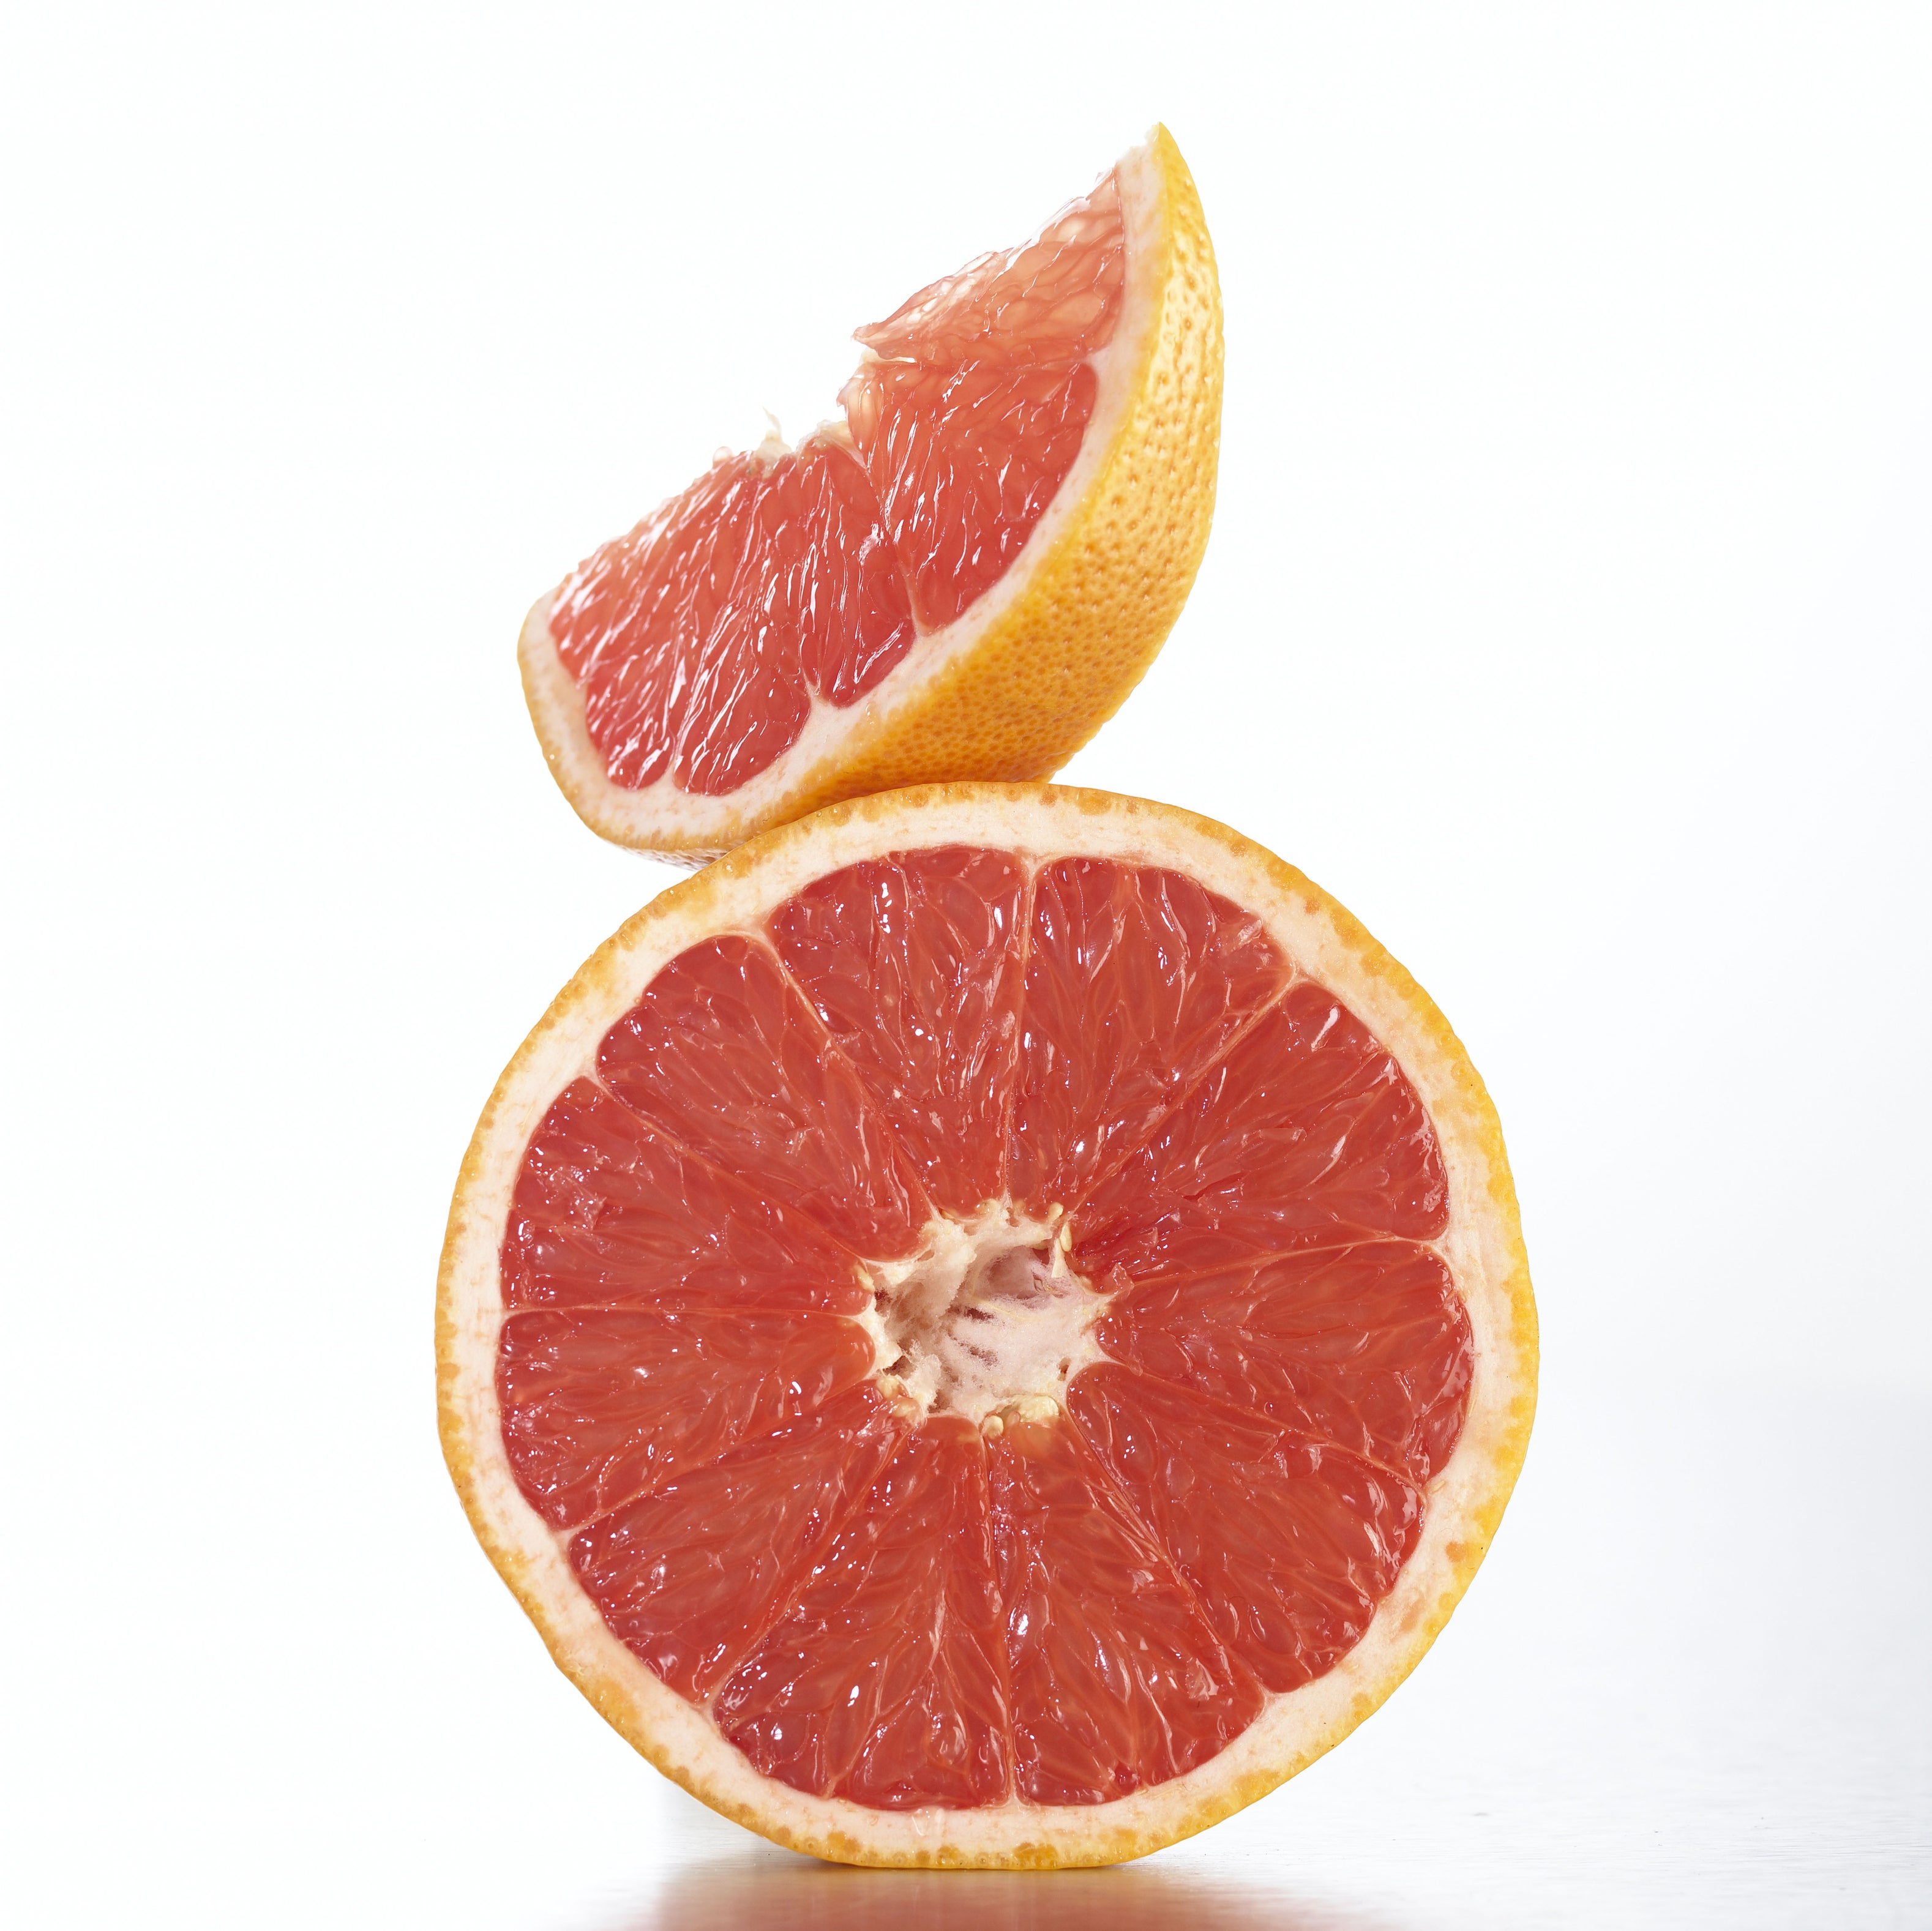 4 Things To Know About The Grapefruit Method Fellatio Trick You Saw In 'Girl's Trip'
